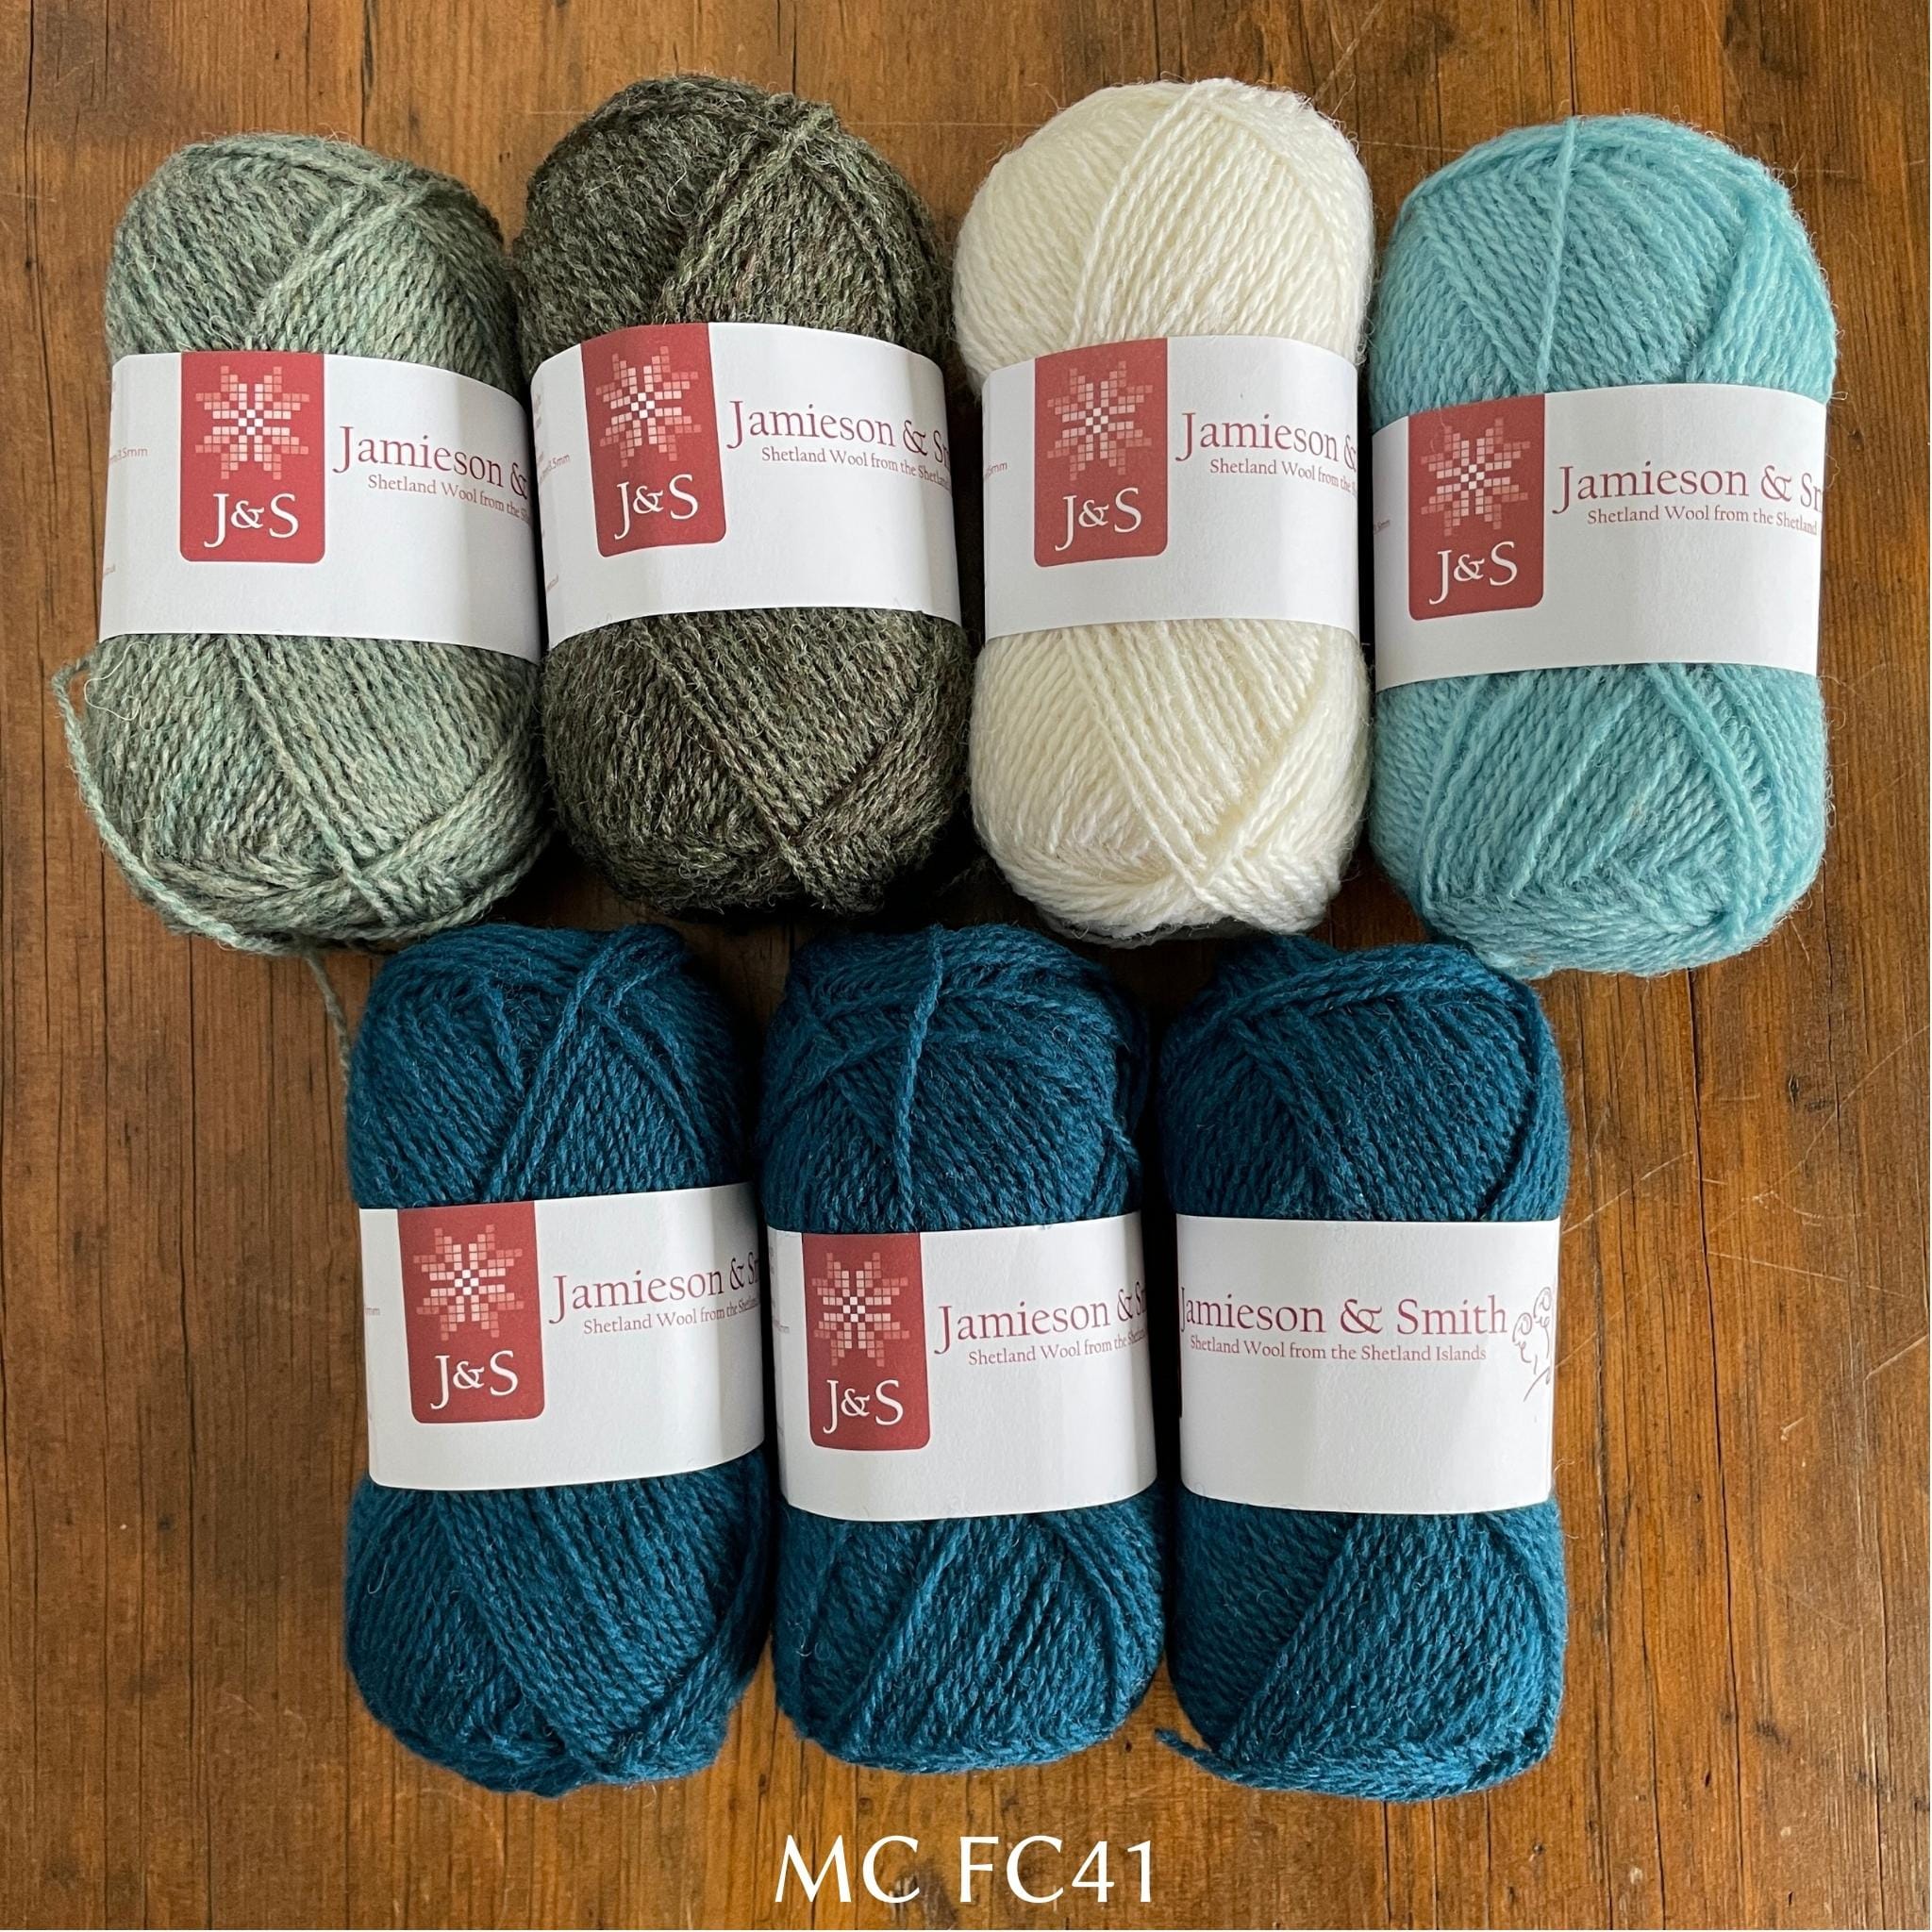 7 balls of J&S yarn in deep turquoise, grey, two light blues, and white